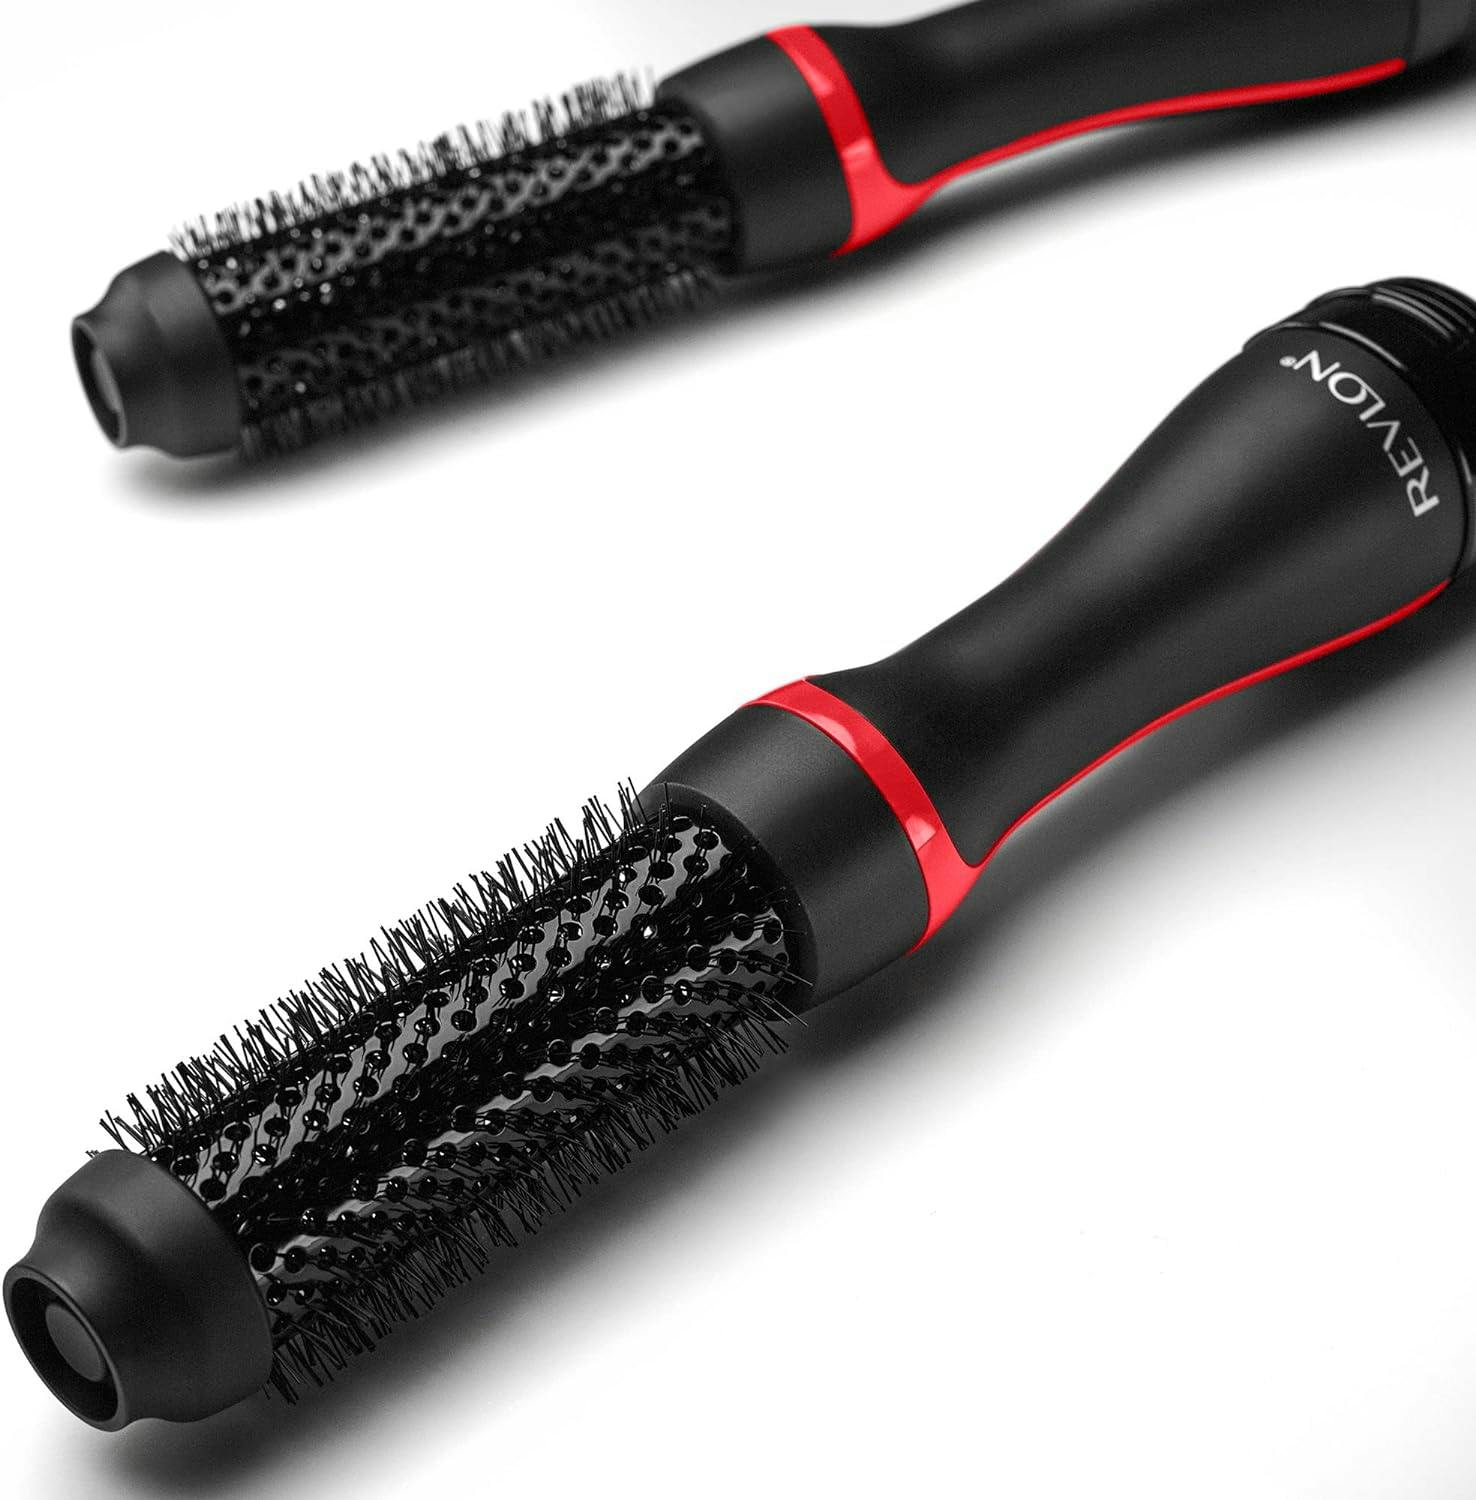 Revlon One-Step Style Root Booster Round Brush Dryer & Styler